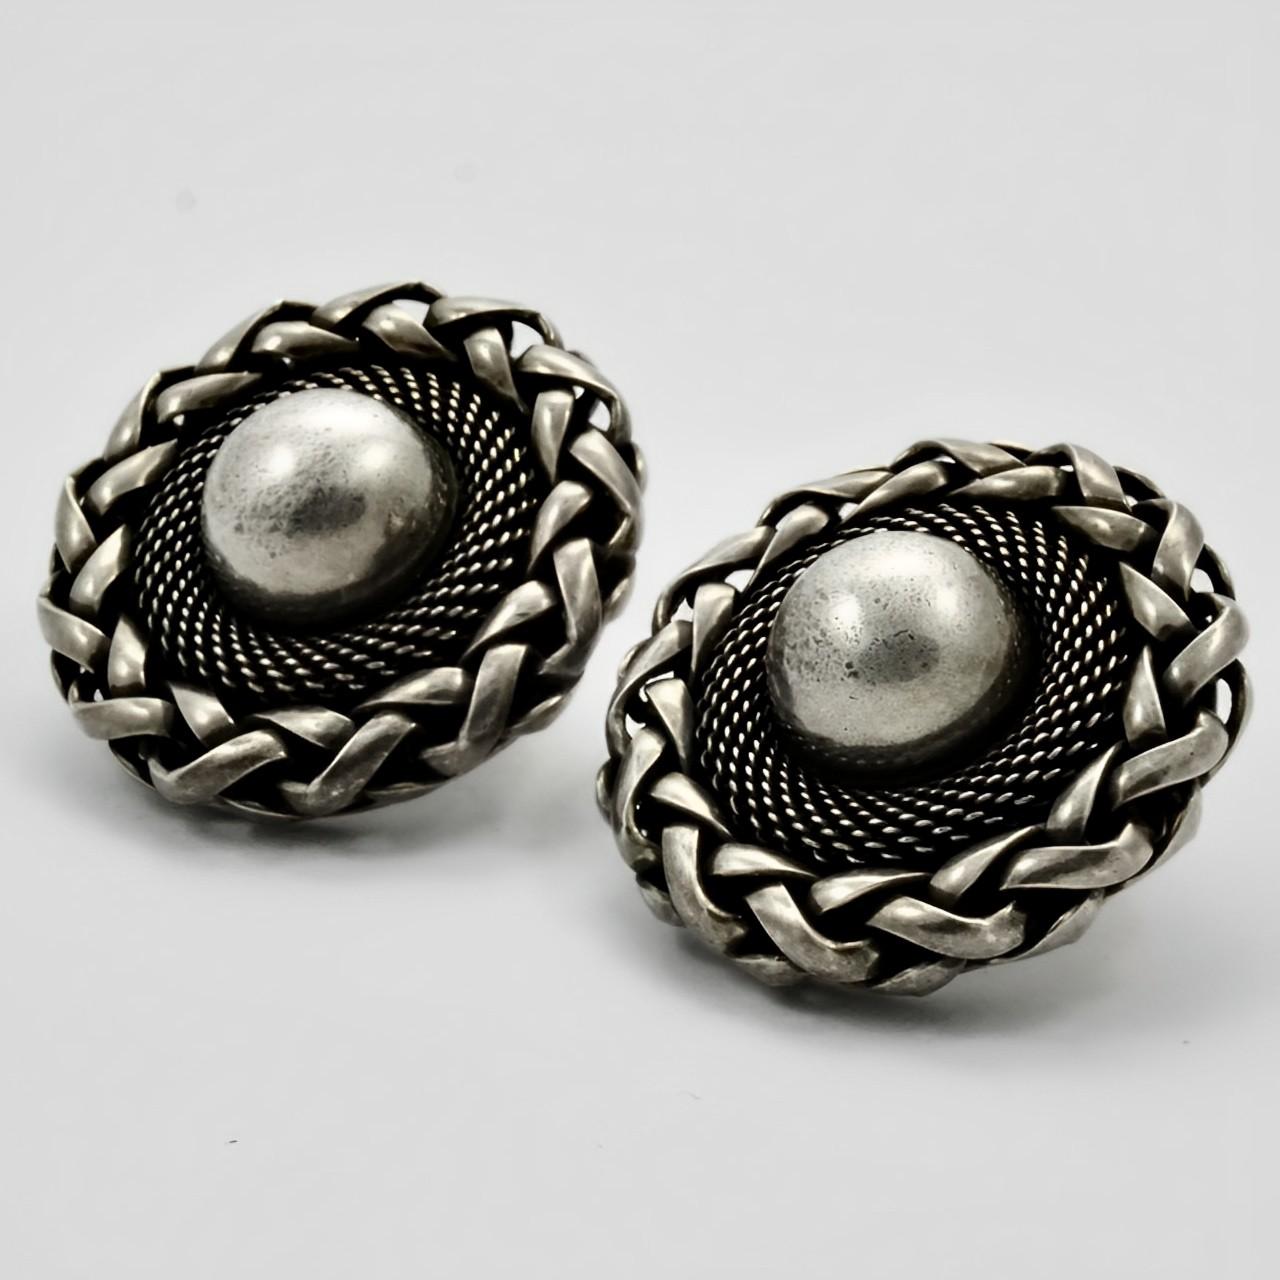 Butler & Wilson Silver Tone Ornate Clip On Earrings circa 1980s For Sale 1